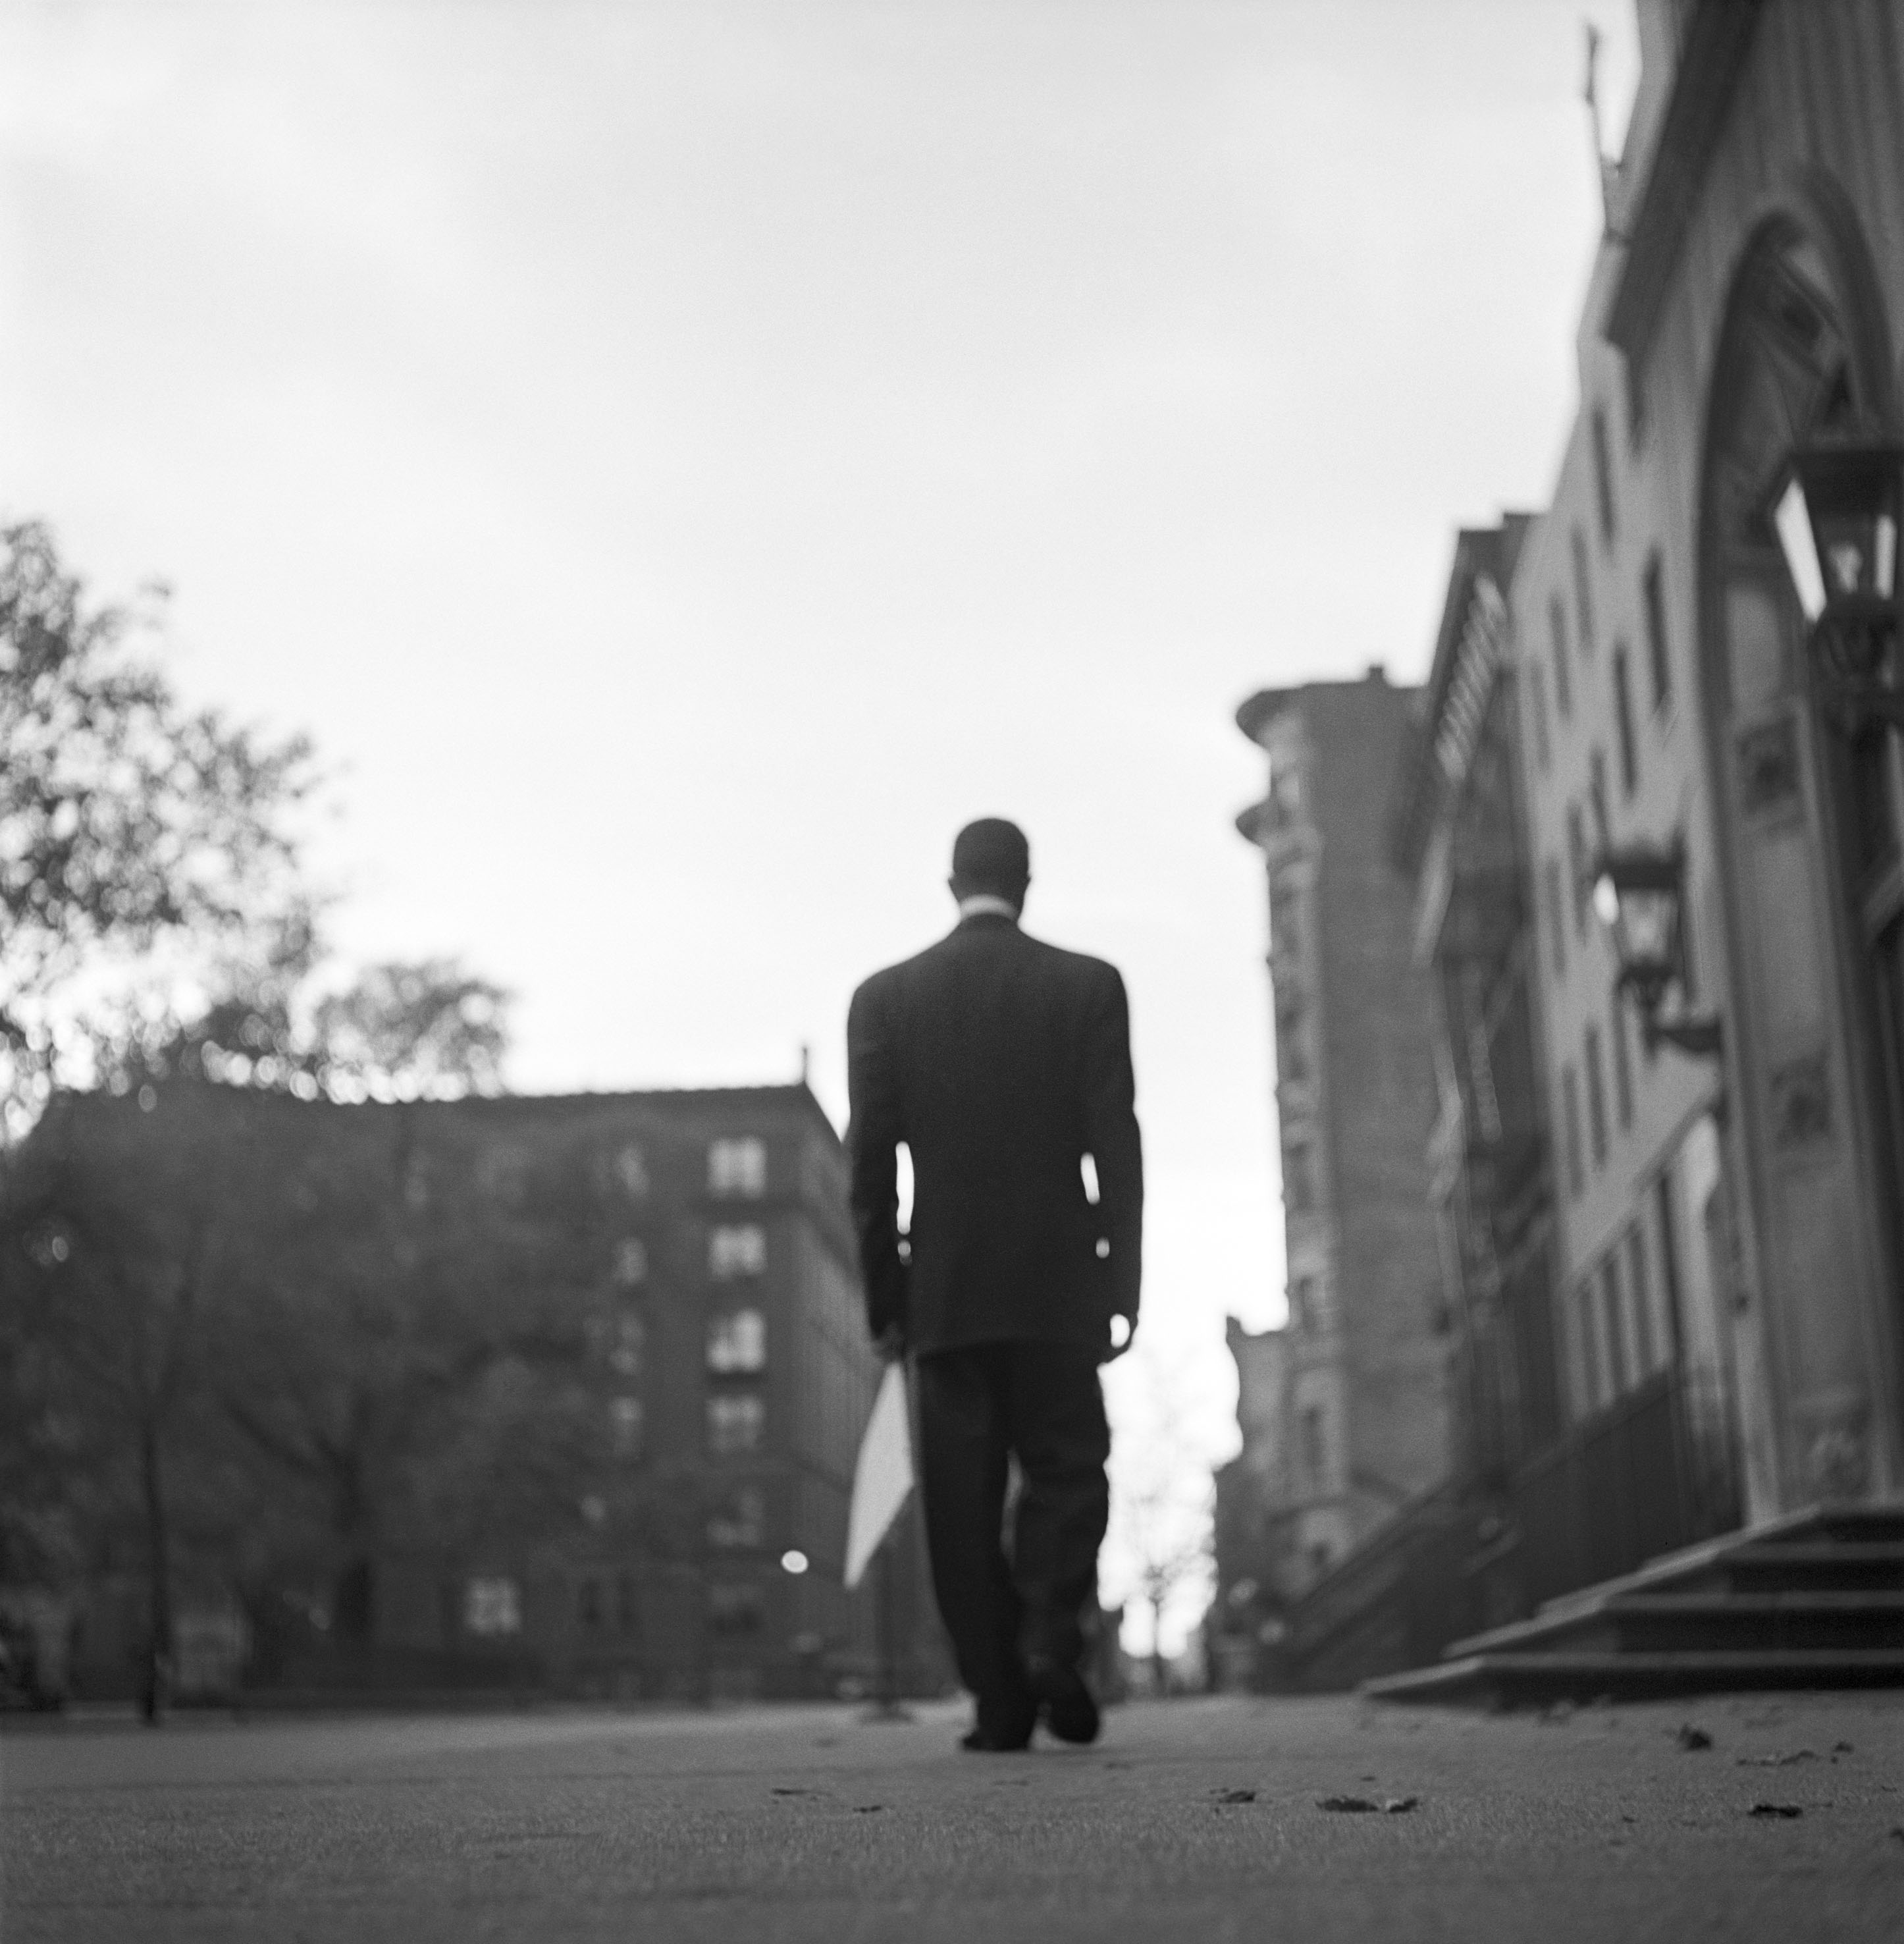 Slightly unfocused image of a man in suit walking through a setting of apartment buildings and trees. Man is seen from behind partly silhouetted against a white sky.